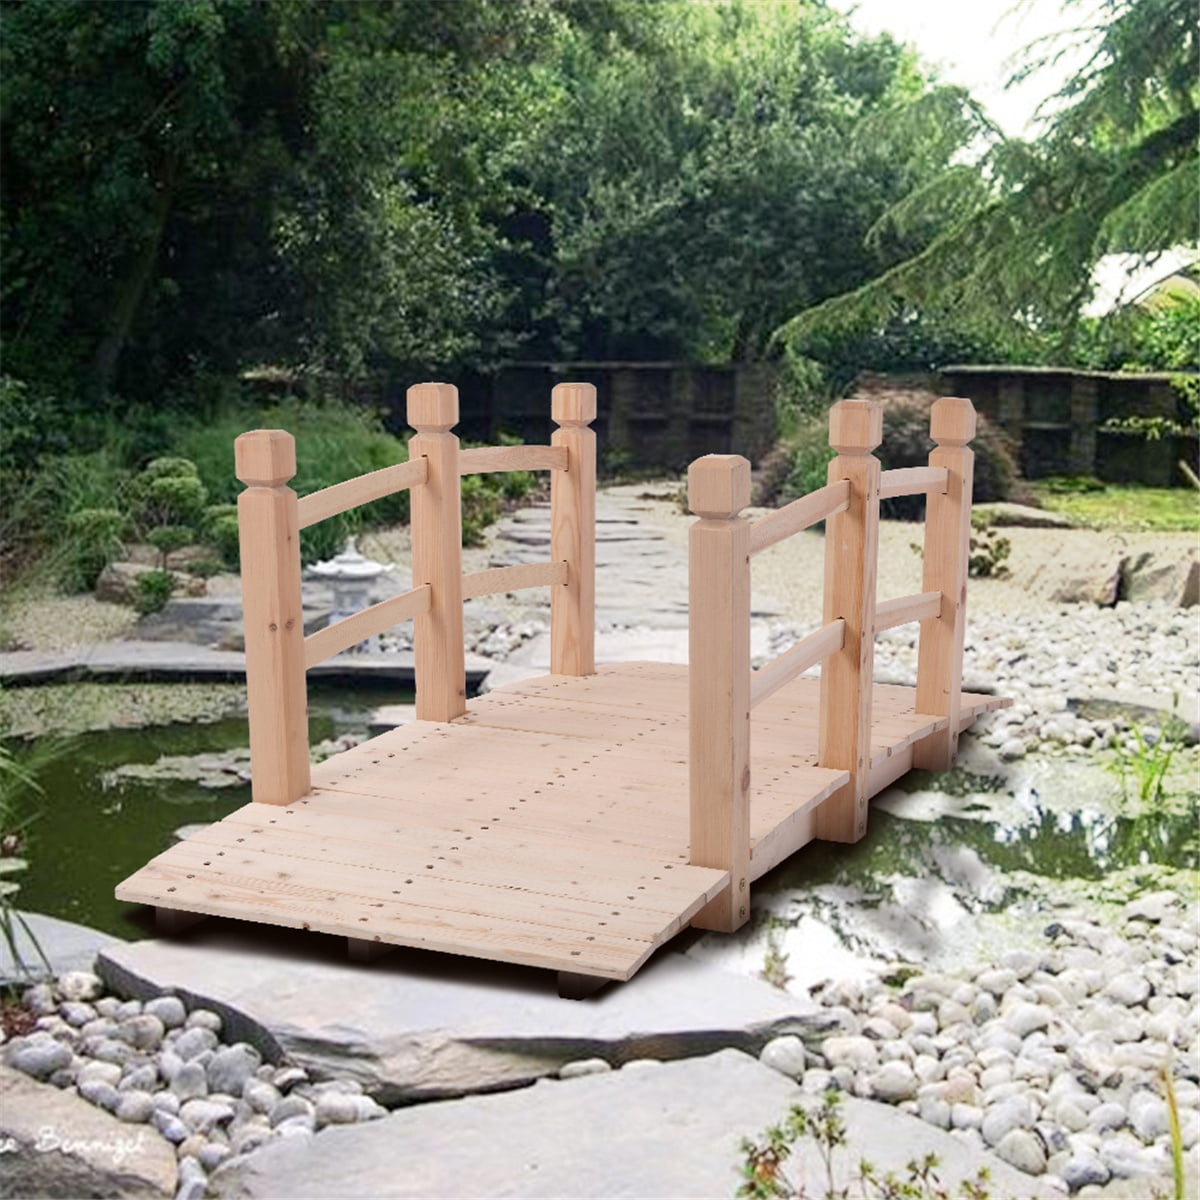 Classic Decoration for Landscape Backyard Creek Pond or Farm Anticorrosive Wooden Stained Finish Footbridge with Rails for Outside Length Carbonization ColorBeige ZZZTWO Arch Garden Bridge 